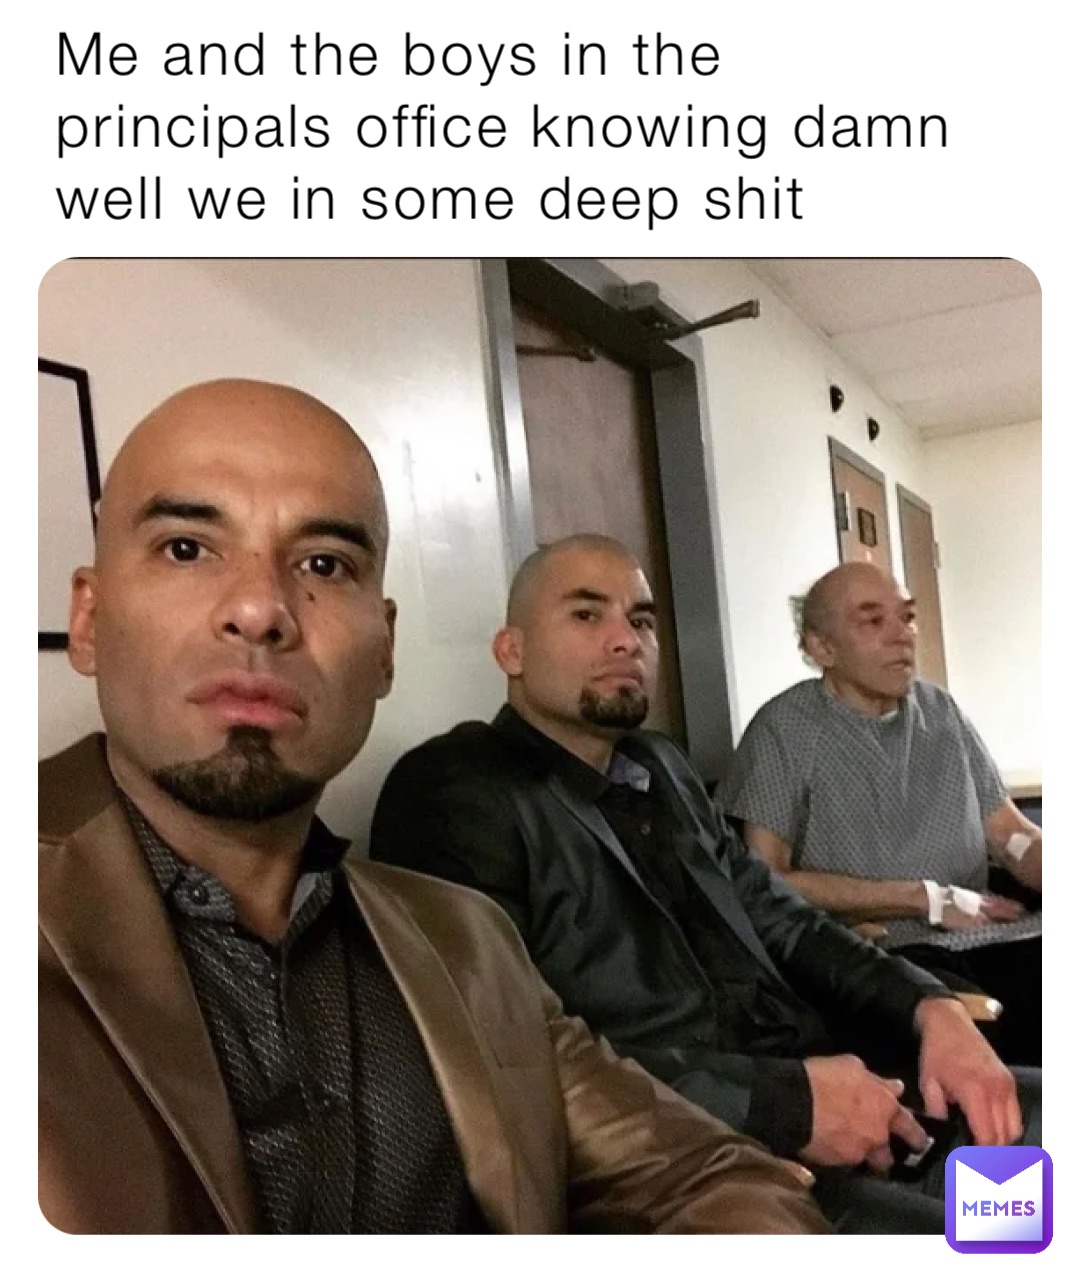 Me and the boys in the principals office knowing damn well we in some deep shit